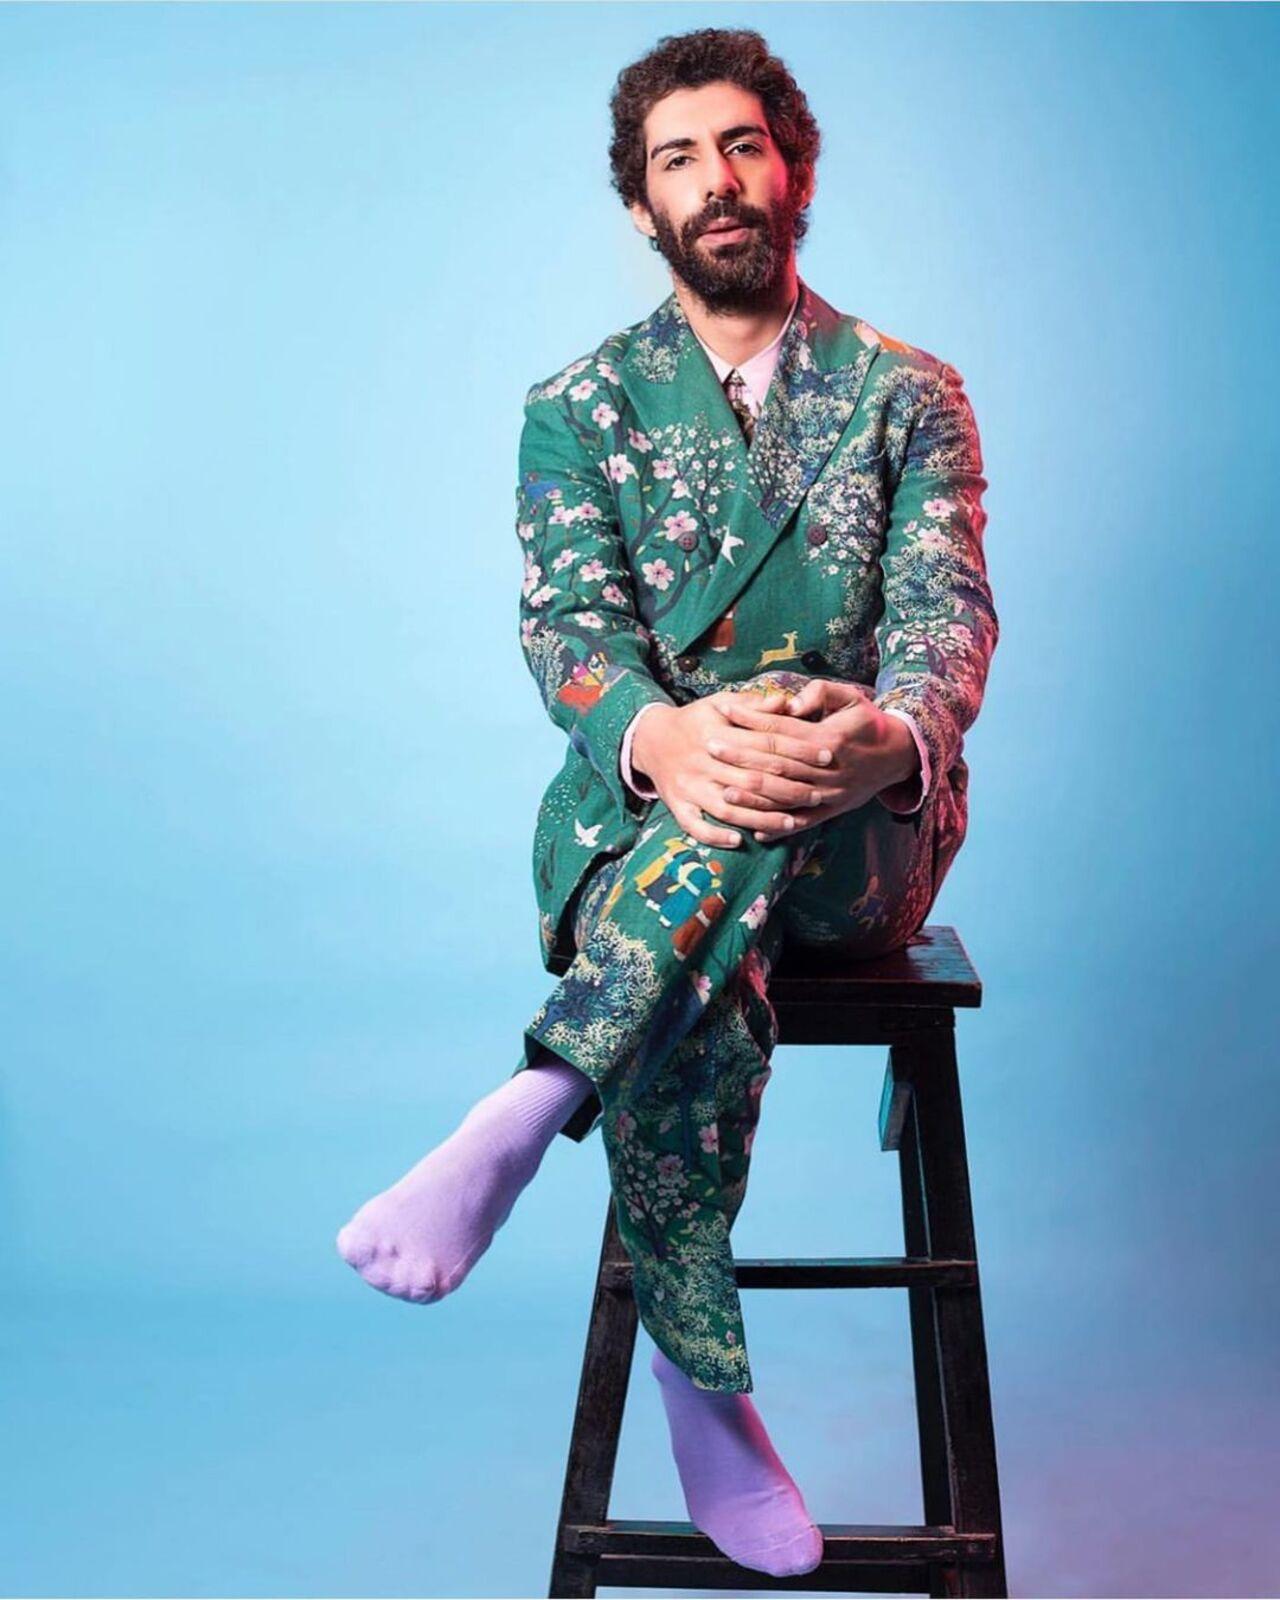 The 'Made in Heaven' actor often makes androgynous sartorial choices and flaunts singular cuts, styles and prints in his outfits - such as this wrap-around sage green suit with a flamboyant floral print